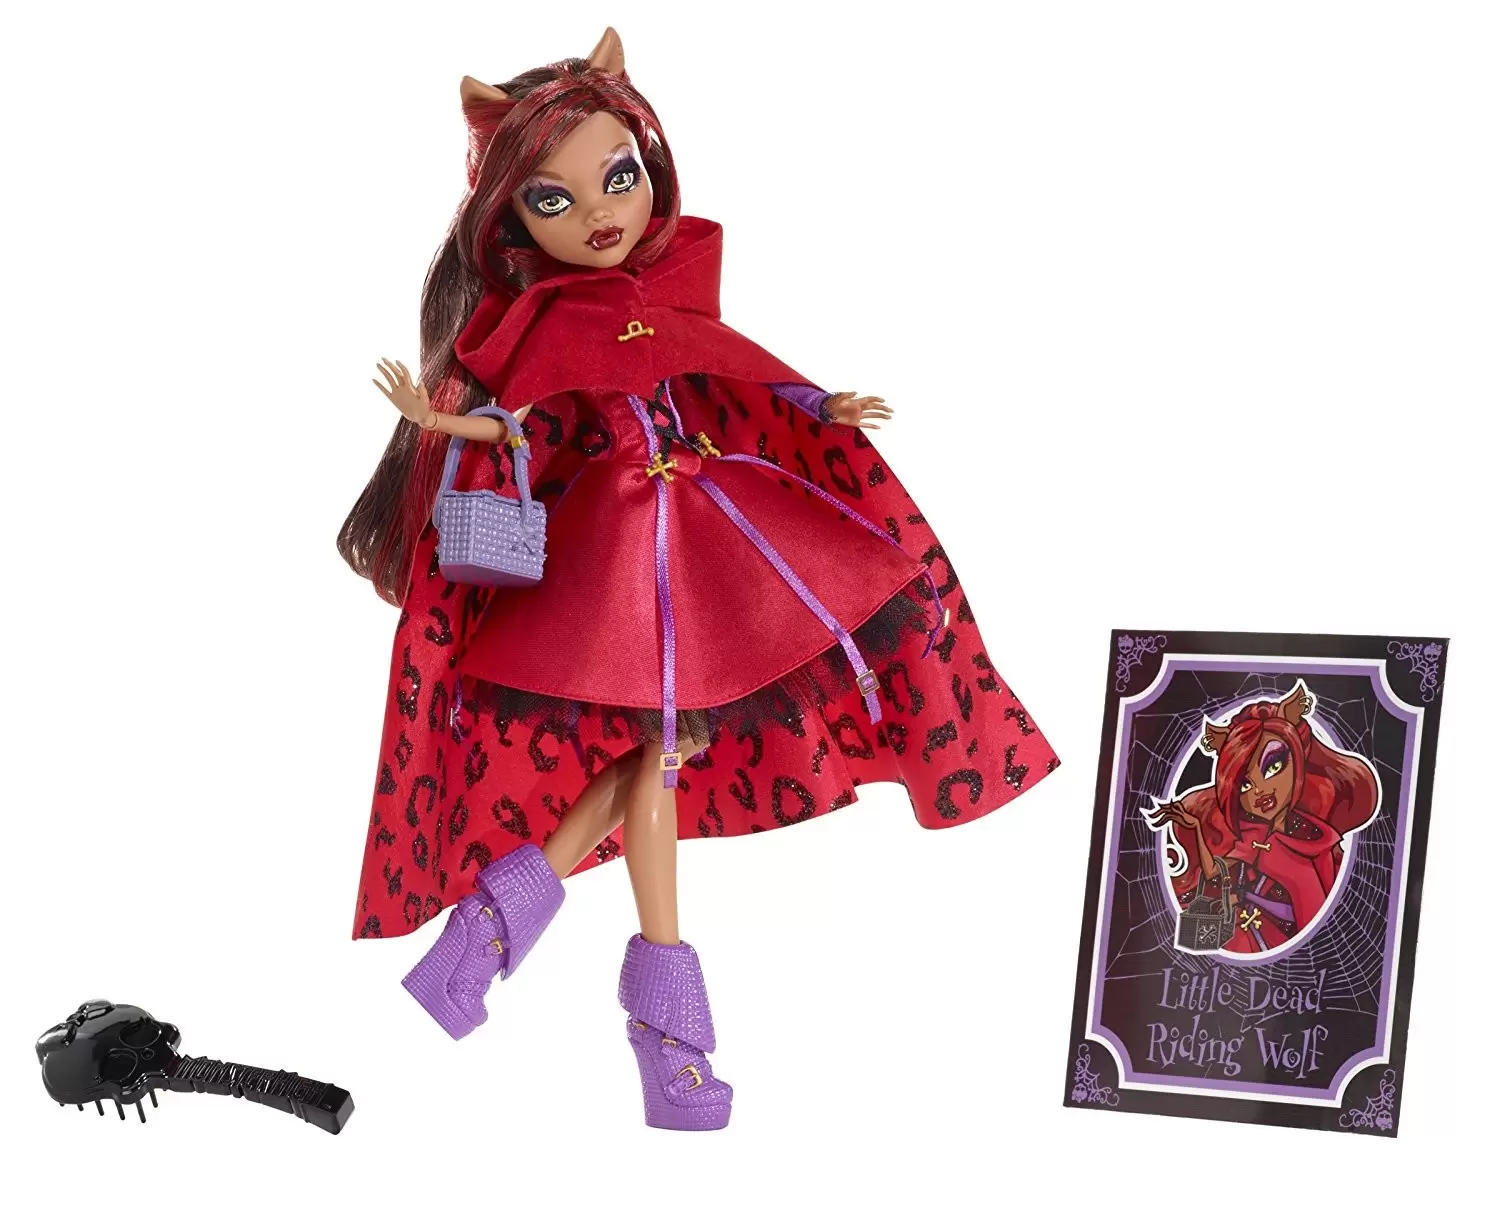 Monster High - Clawdeen Wolf (Little Dead Riding Wolf) - Scary Tales